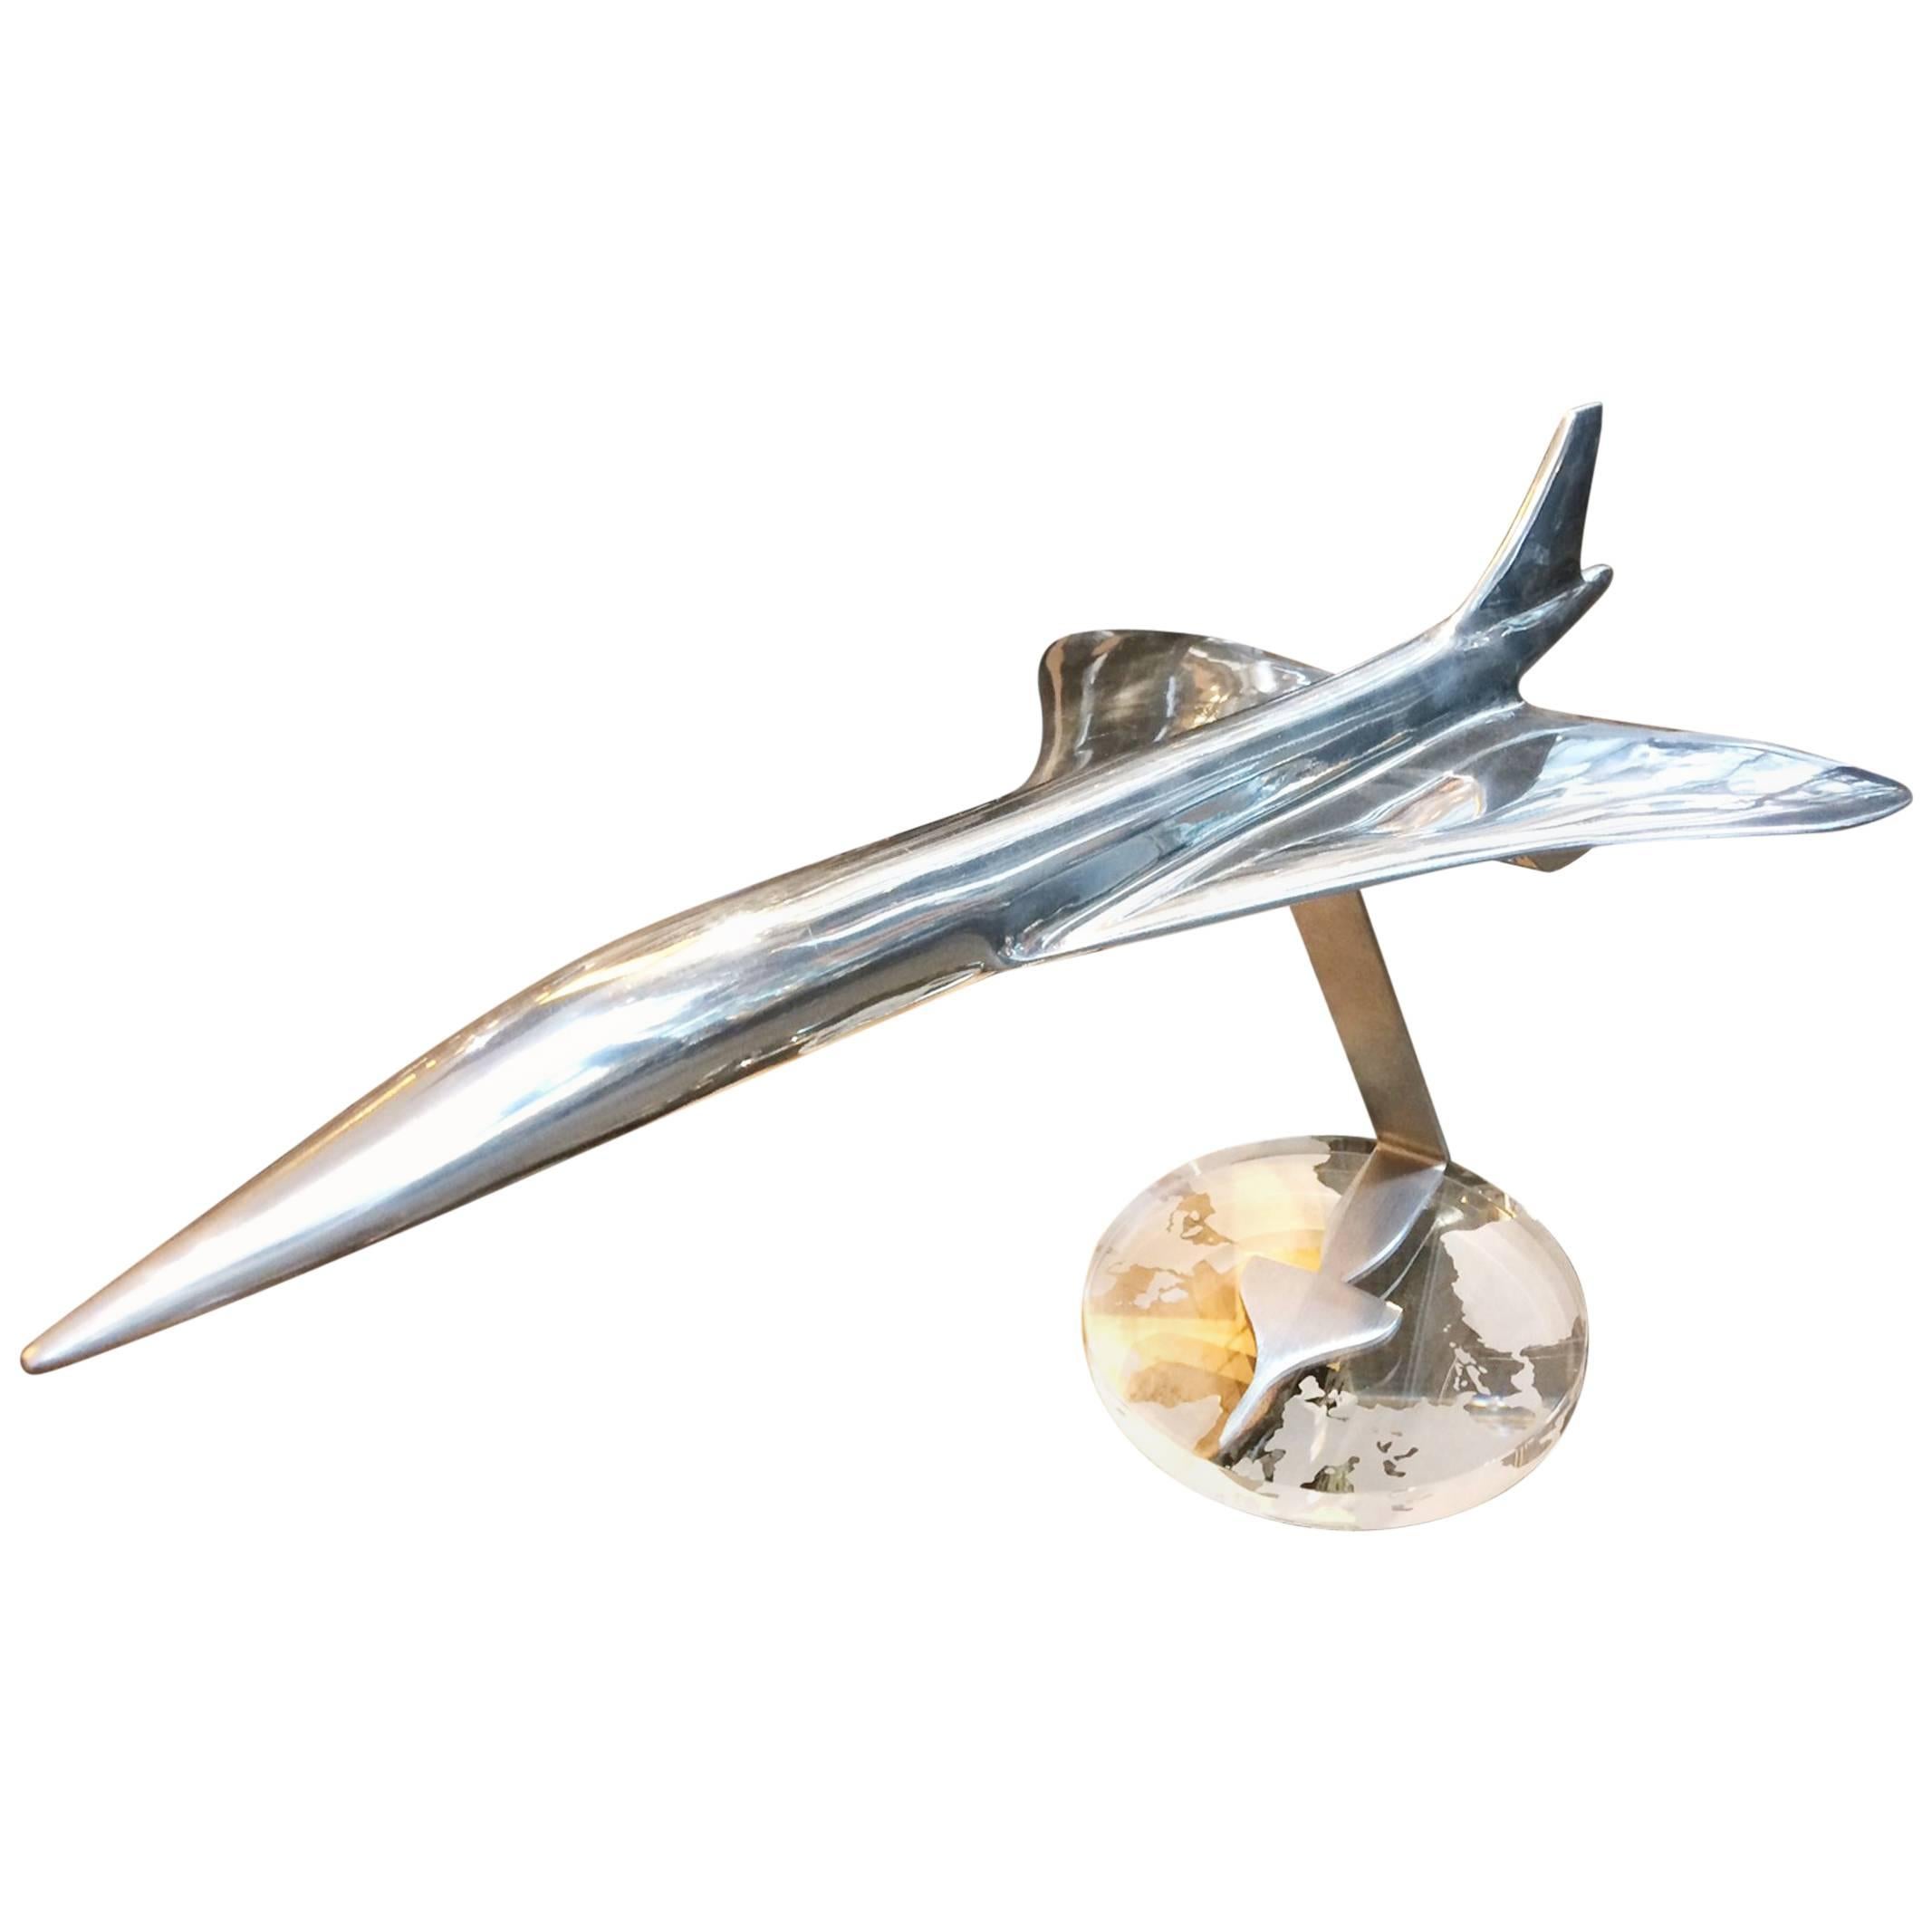 Concorde Model in Polished Aluminium Scale 1/100 on Crystal Base